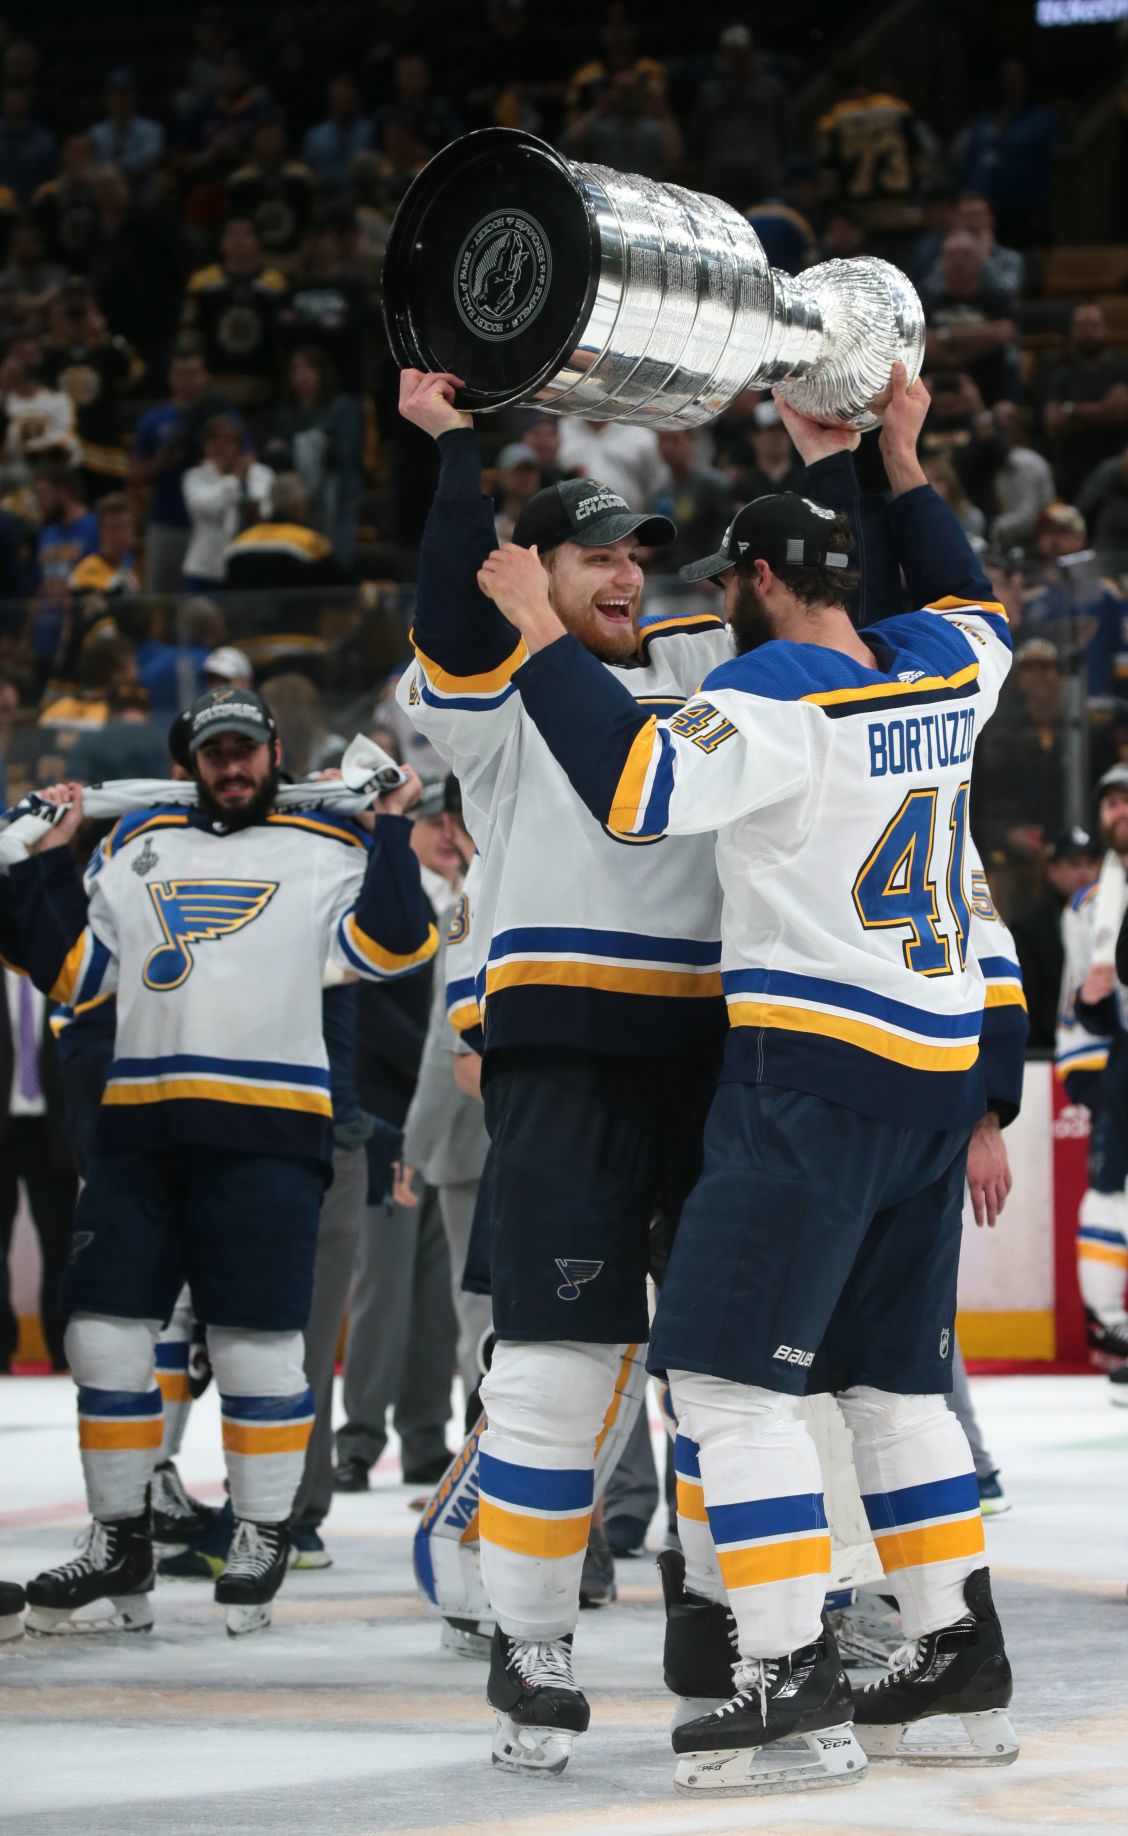 Stanley Cup: St. Louis Blues' long wait for title ends with win over Bruins  - The Washington Post